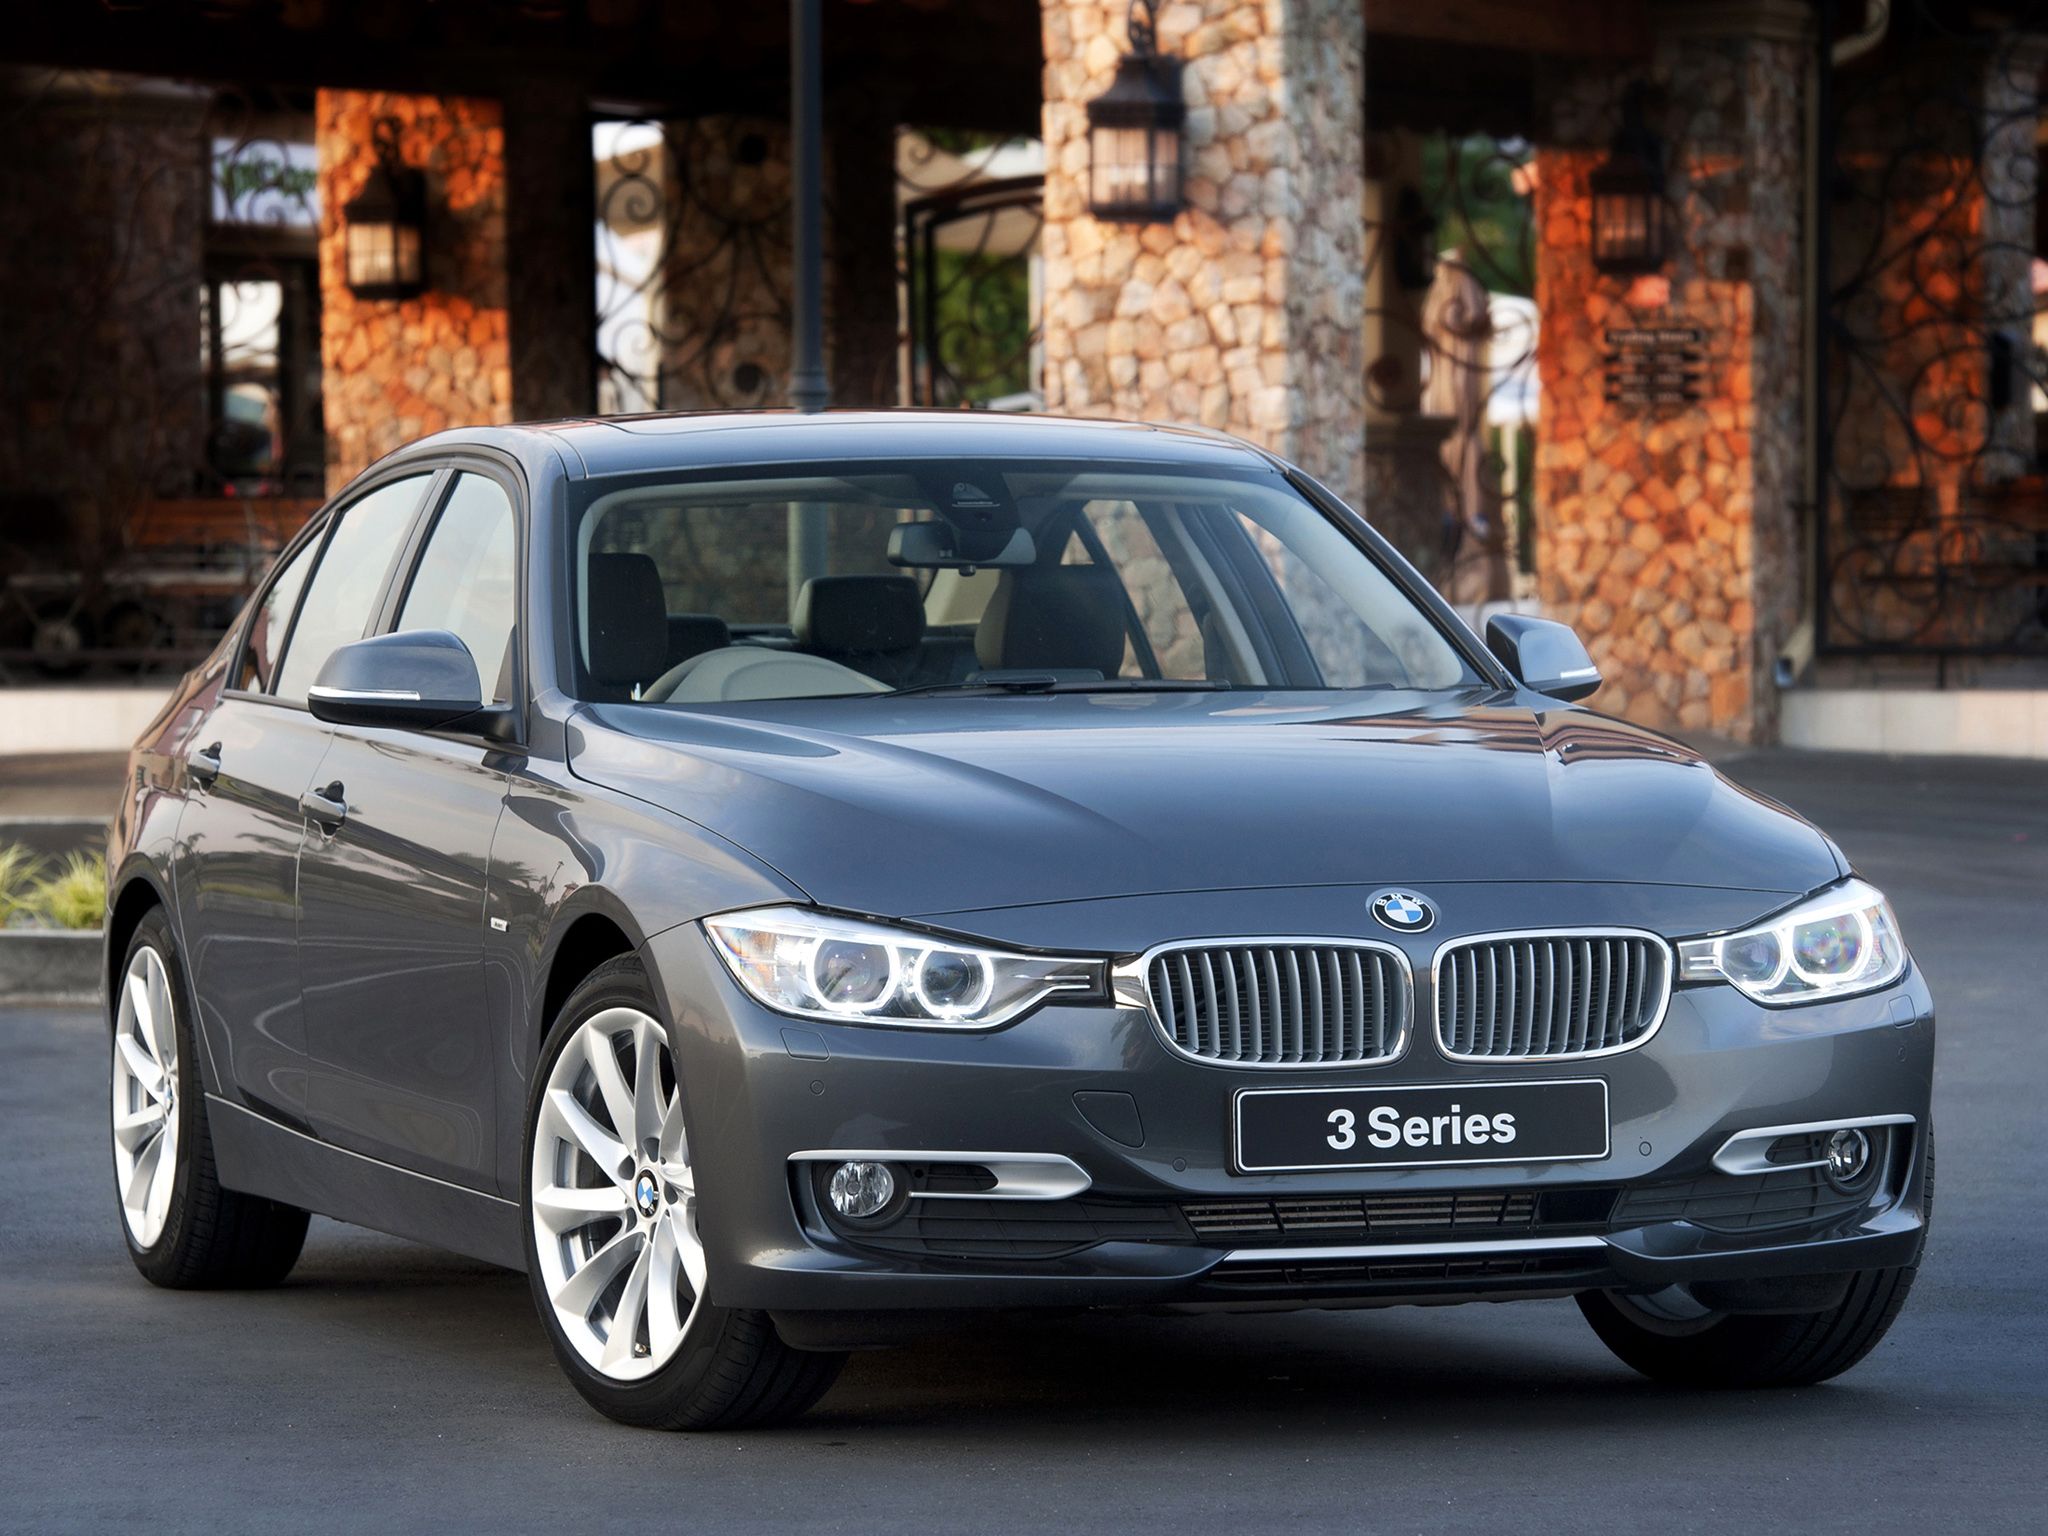 BMW 3 Series F30 Picture. BMW Photo Gallery